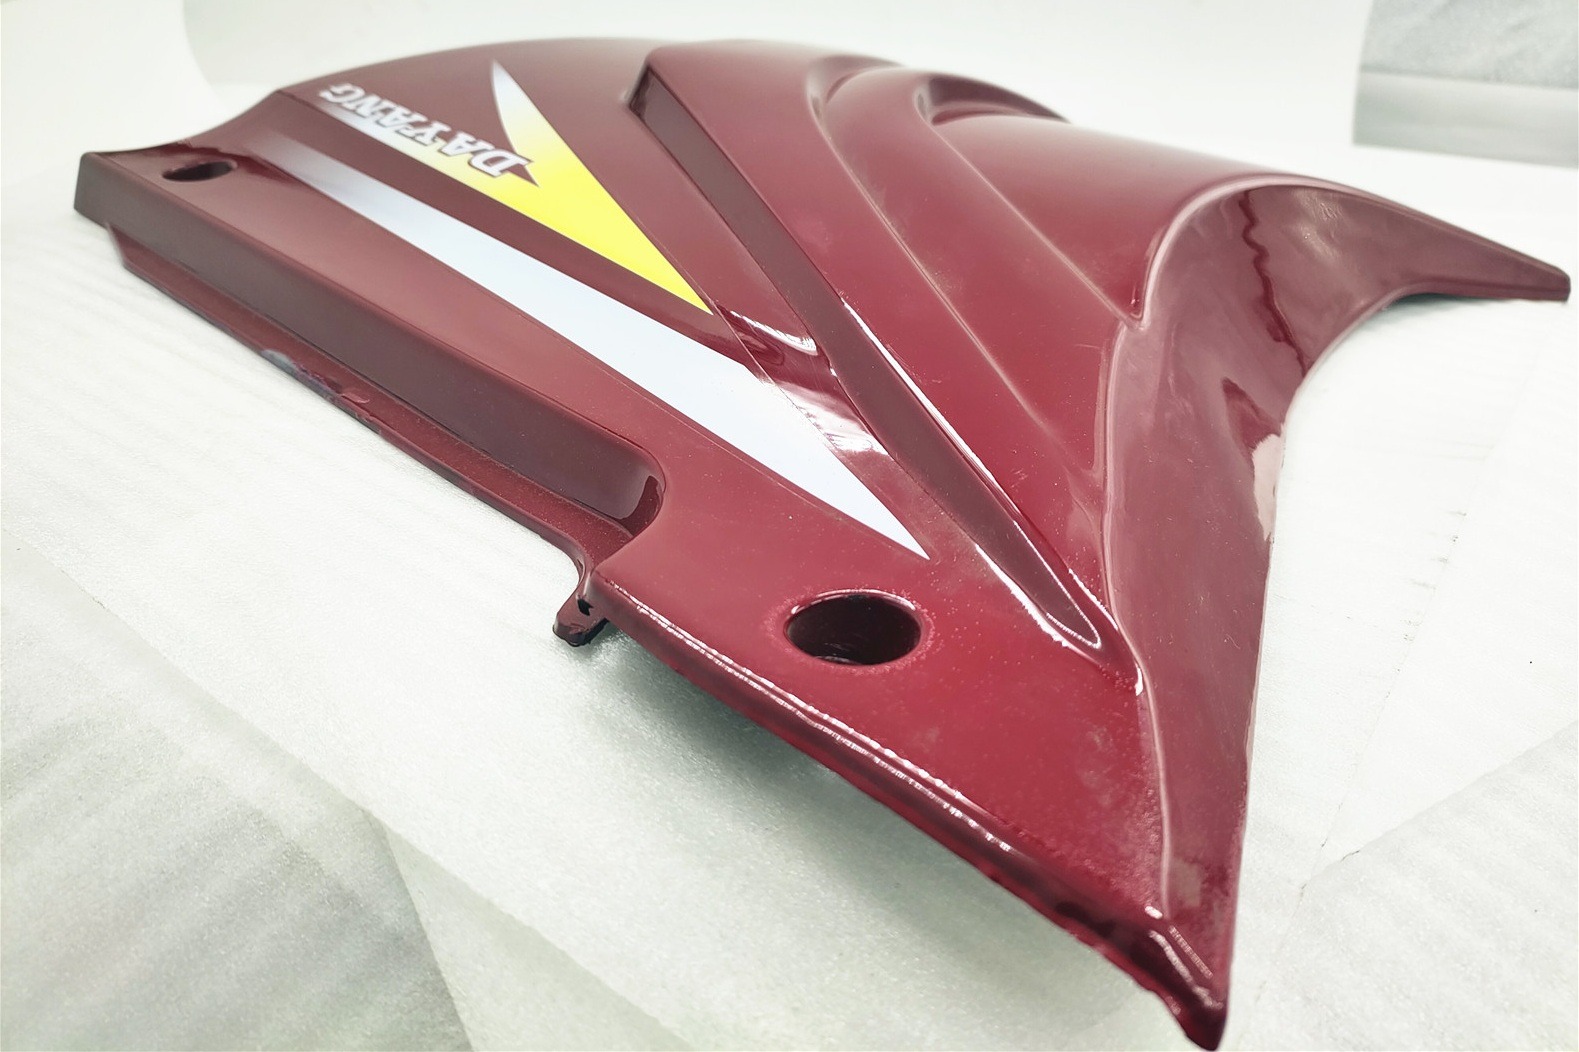 Hot sale BeiYi DAYANG three wheel motorcycle tricycle scooter Prince oil fuel tank side cover 2 for the global market